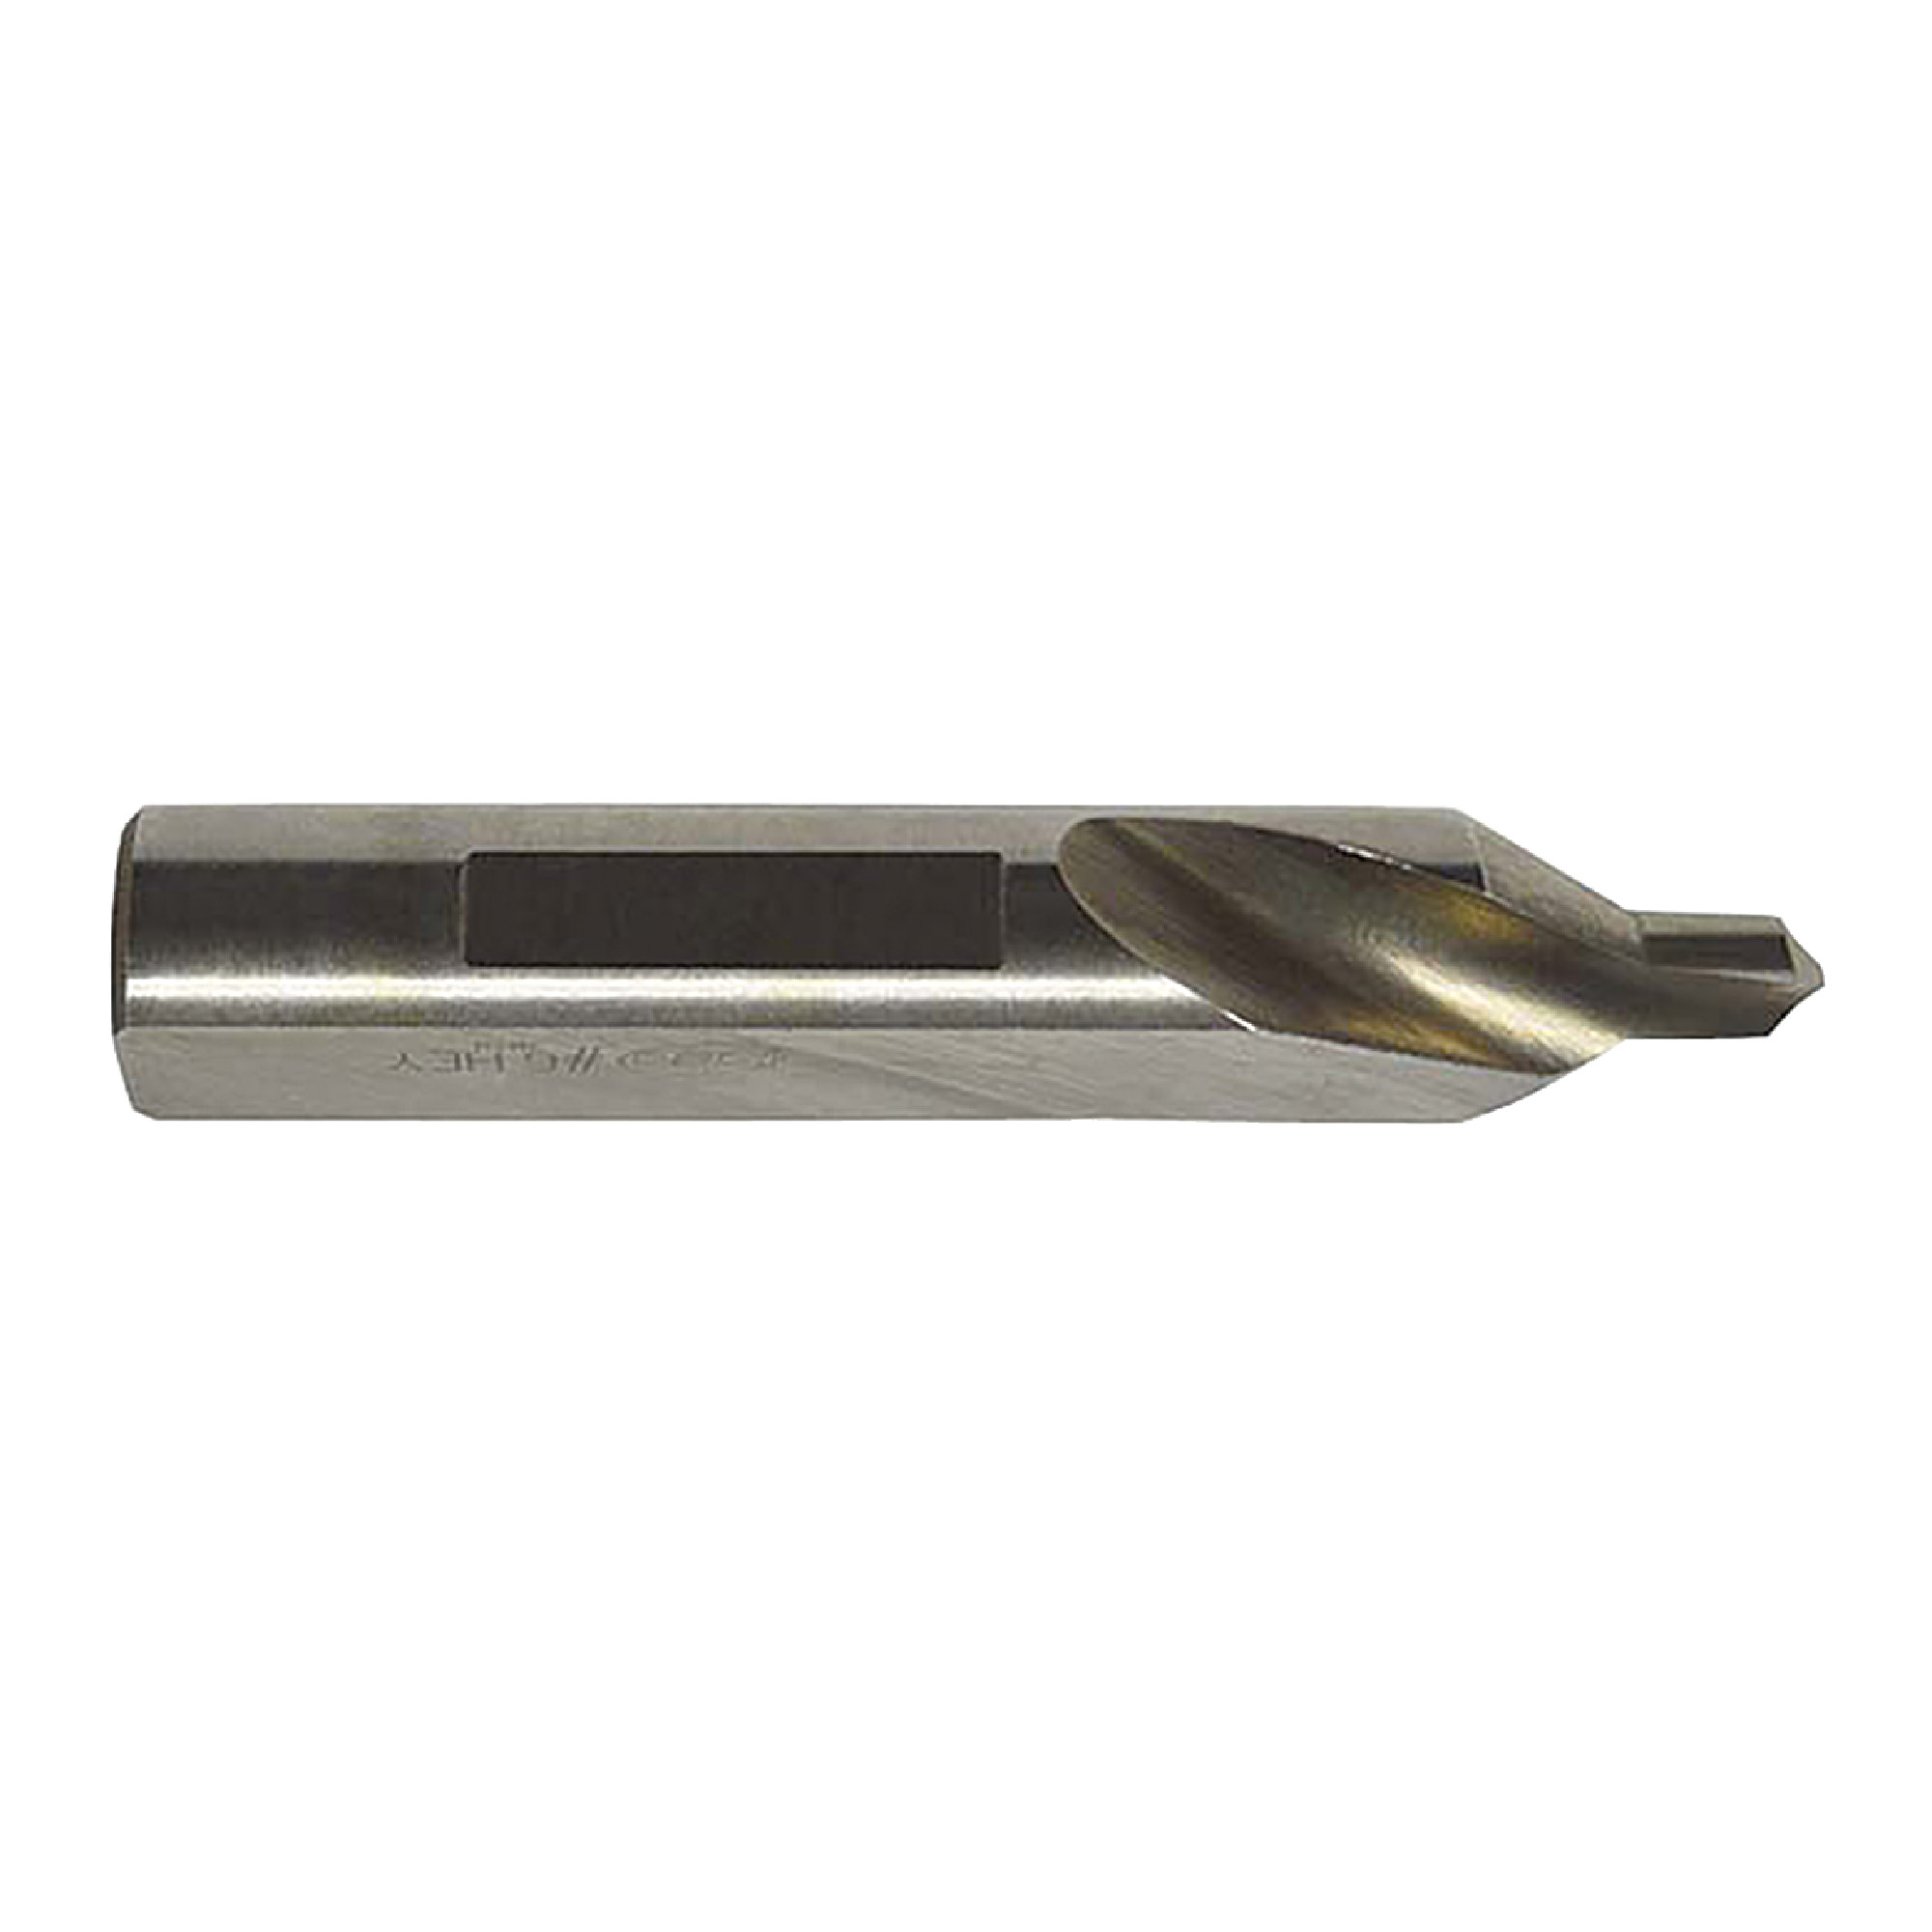 KEO 10690 Plain Type Combined Drills And Countersinks #6 7/32 Pack of 2